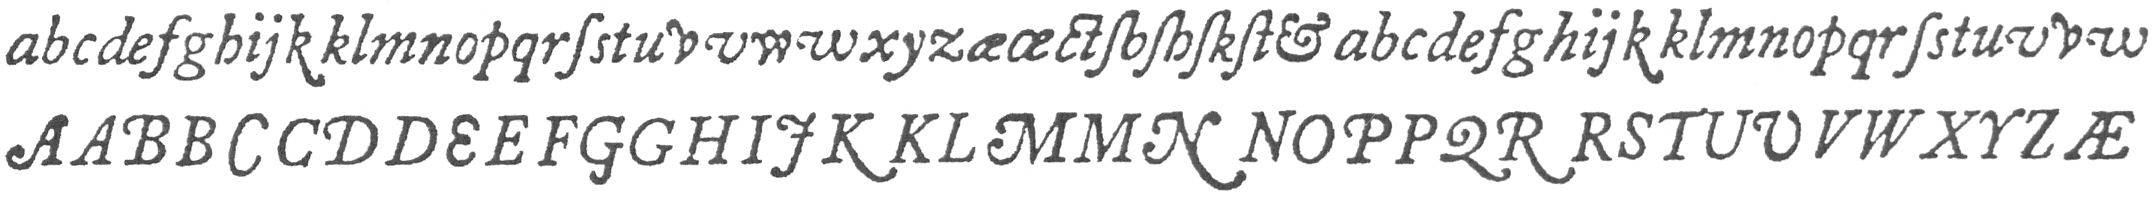 Font type - Old Face Italic